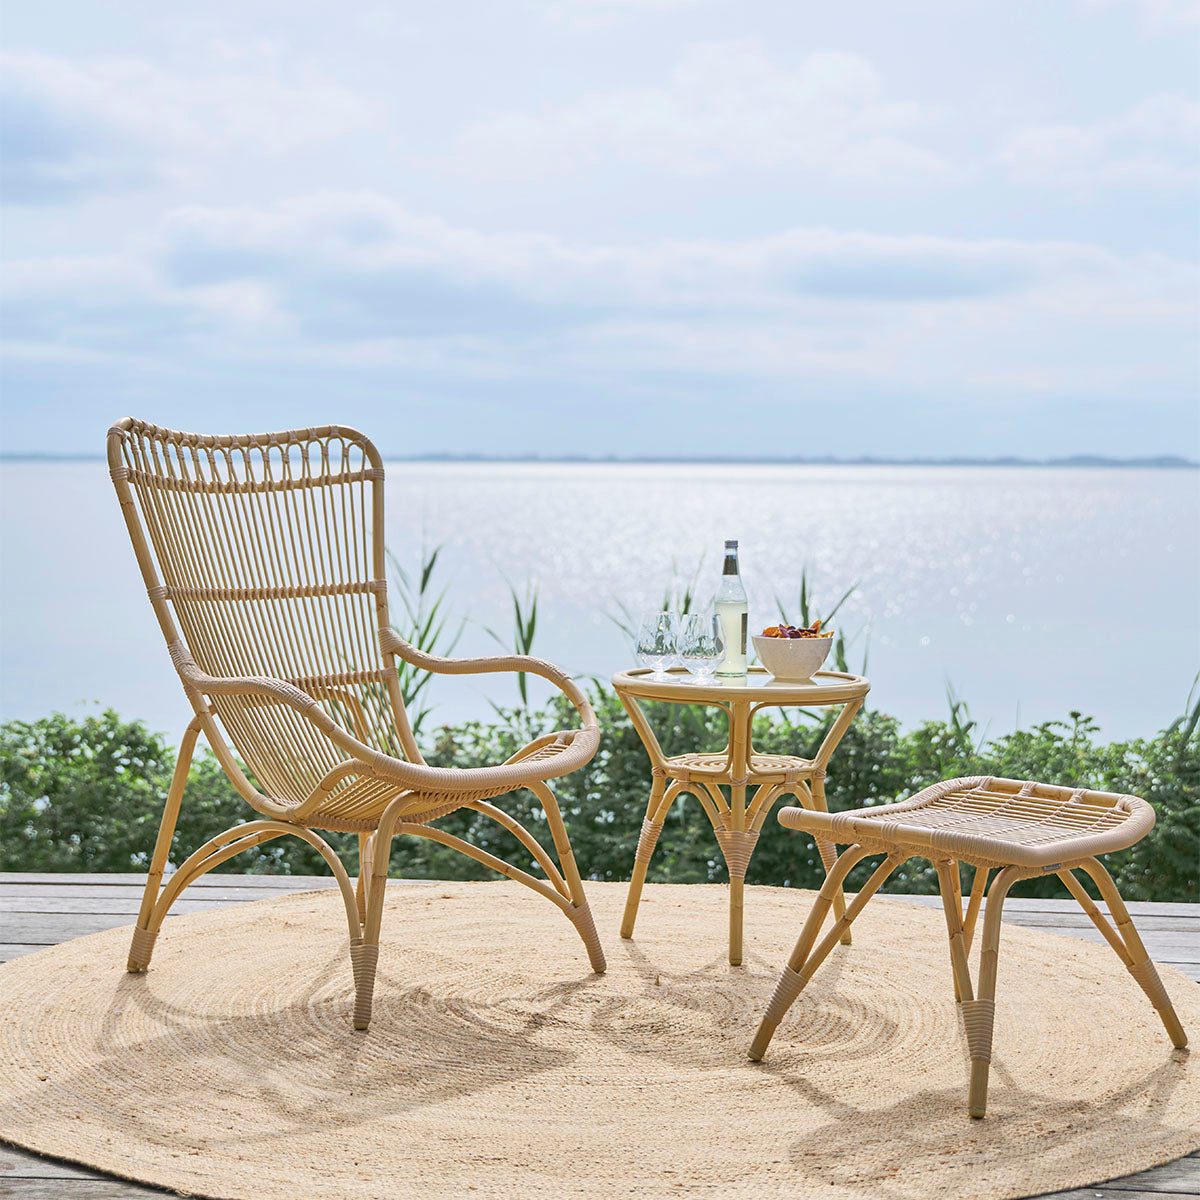 Outdoor Lounge Chair | Monet Exterior Lounge Chair - Sika-Design.com